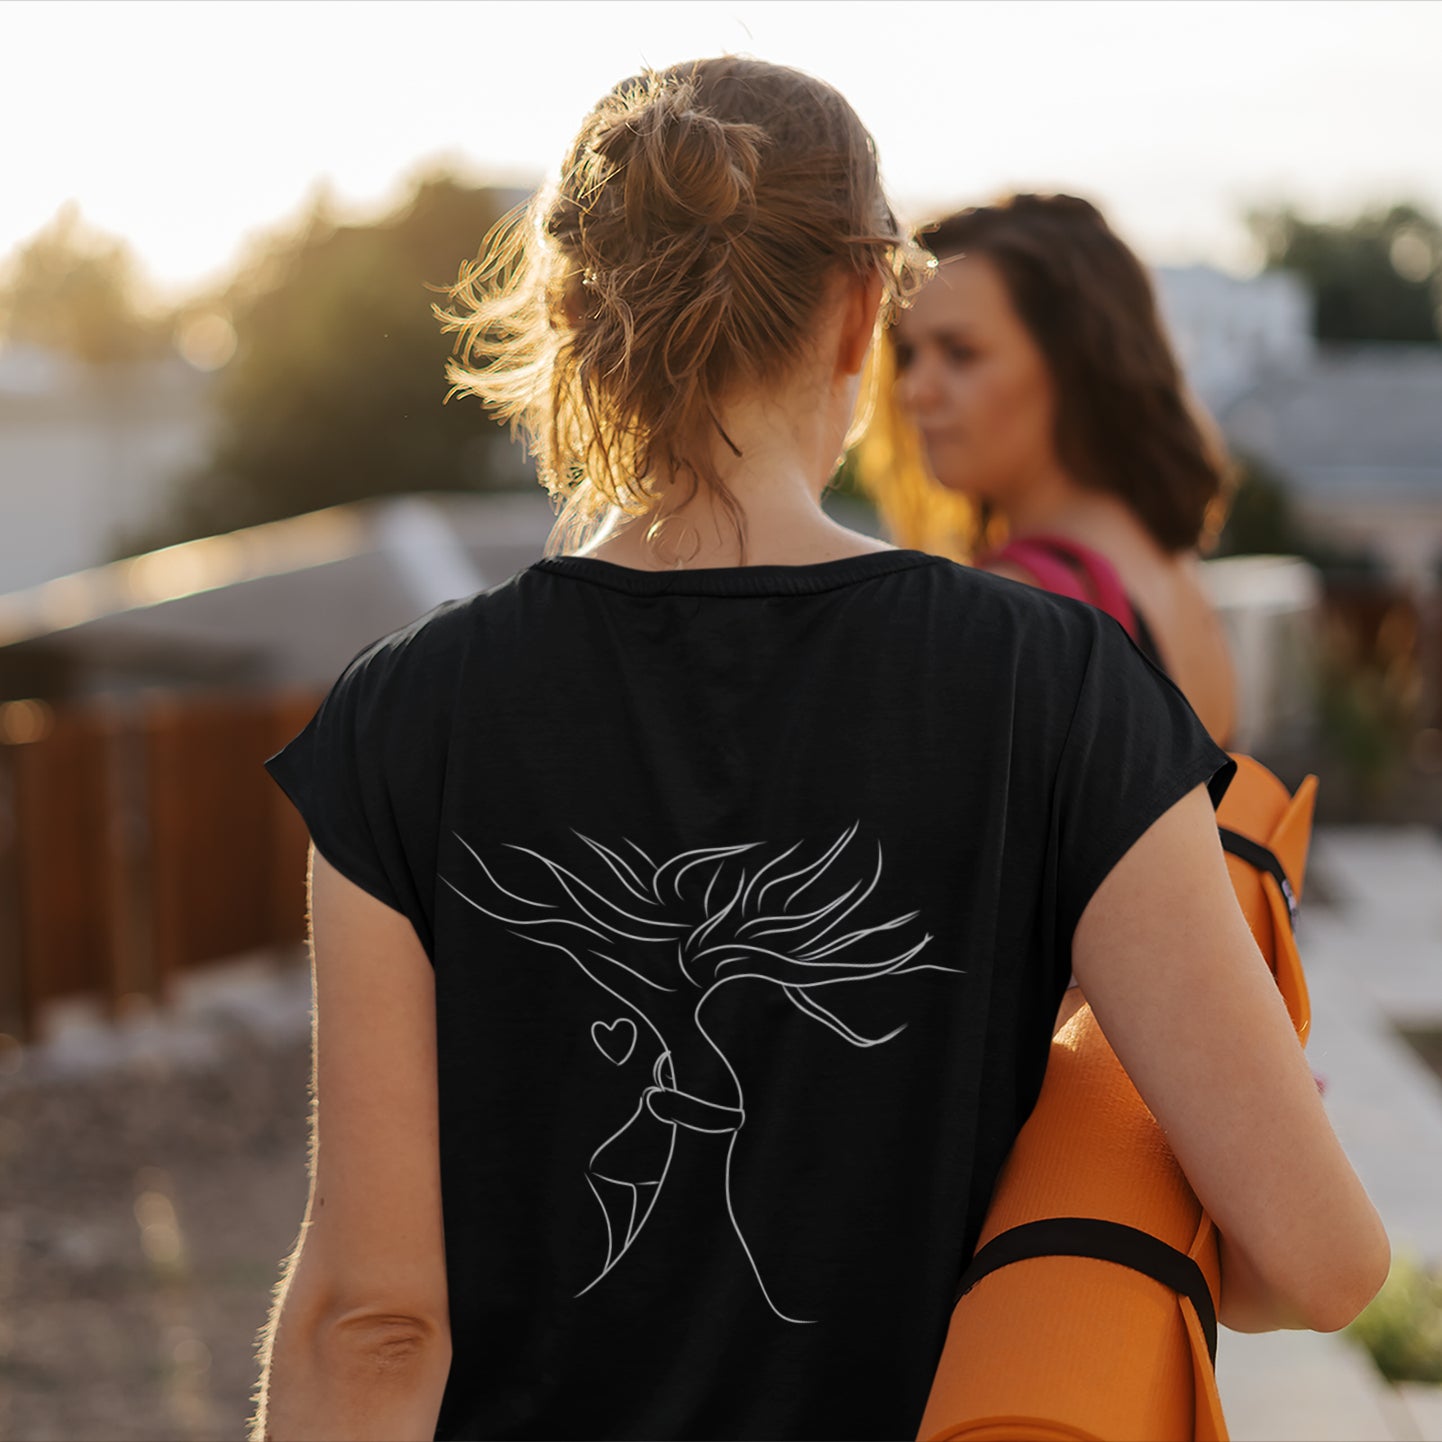 Sustainable Embrace White Tree | 100% Organic Cotton T Shirt worn by a woman carrying a yoga mat